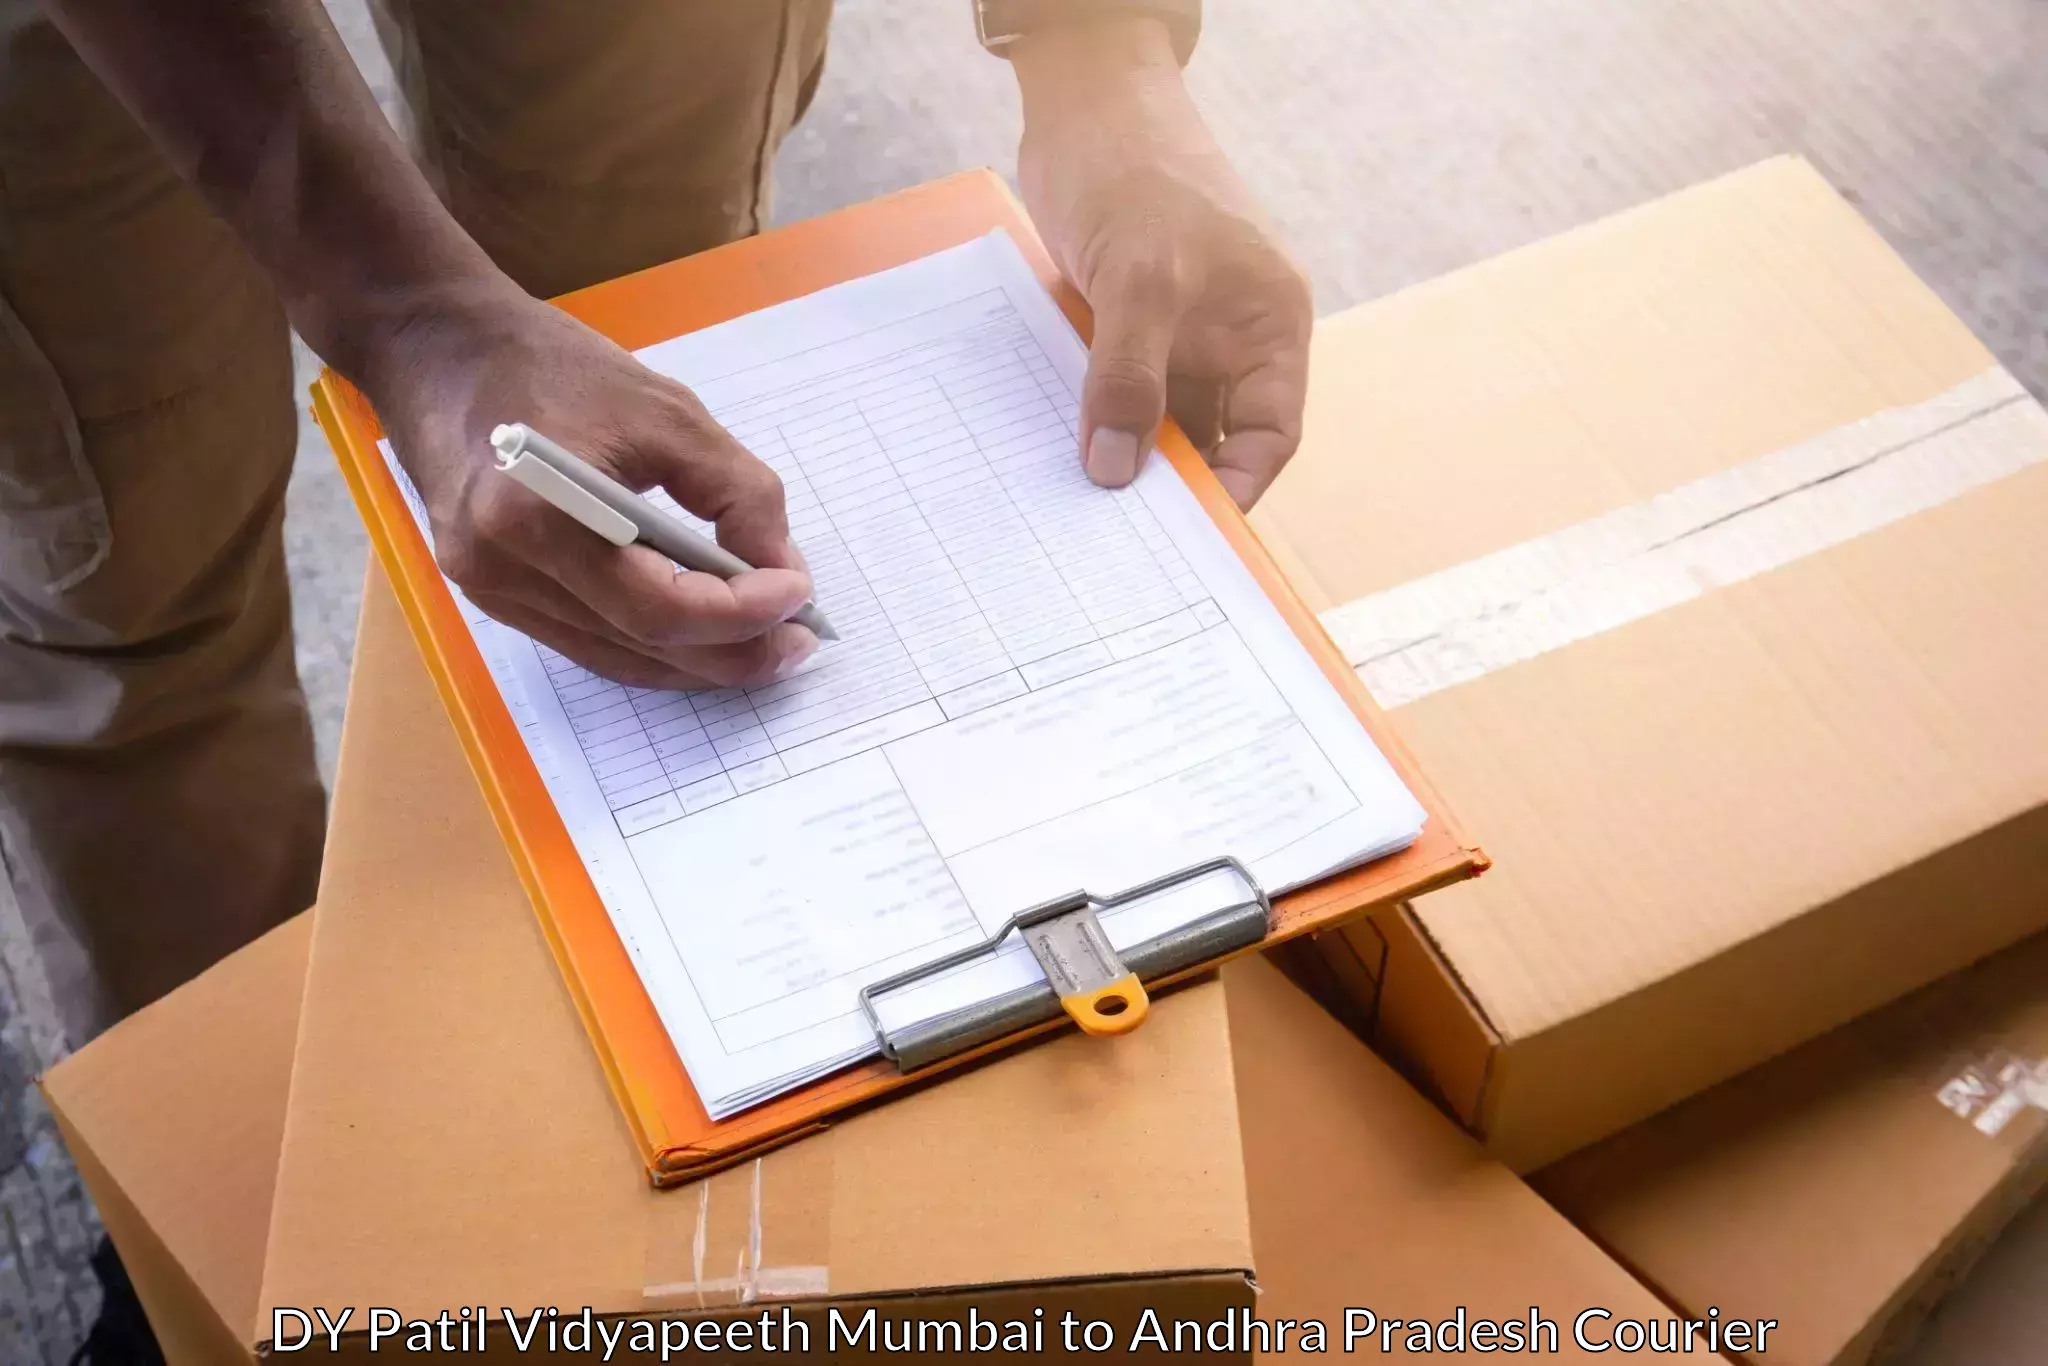 Express package delivery DY Patil Vidyapeeth Mumbai to Andhra Pradesh